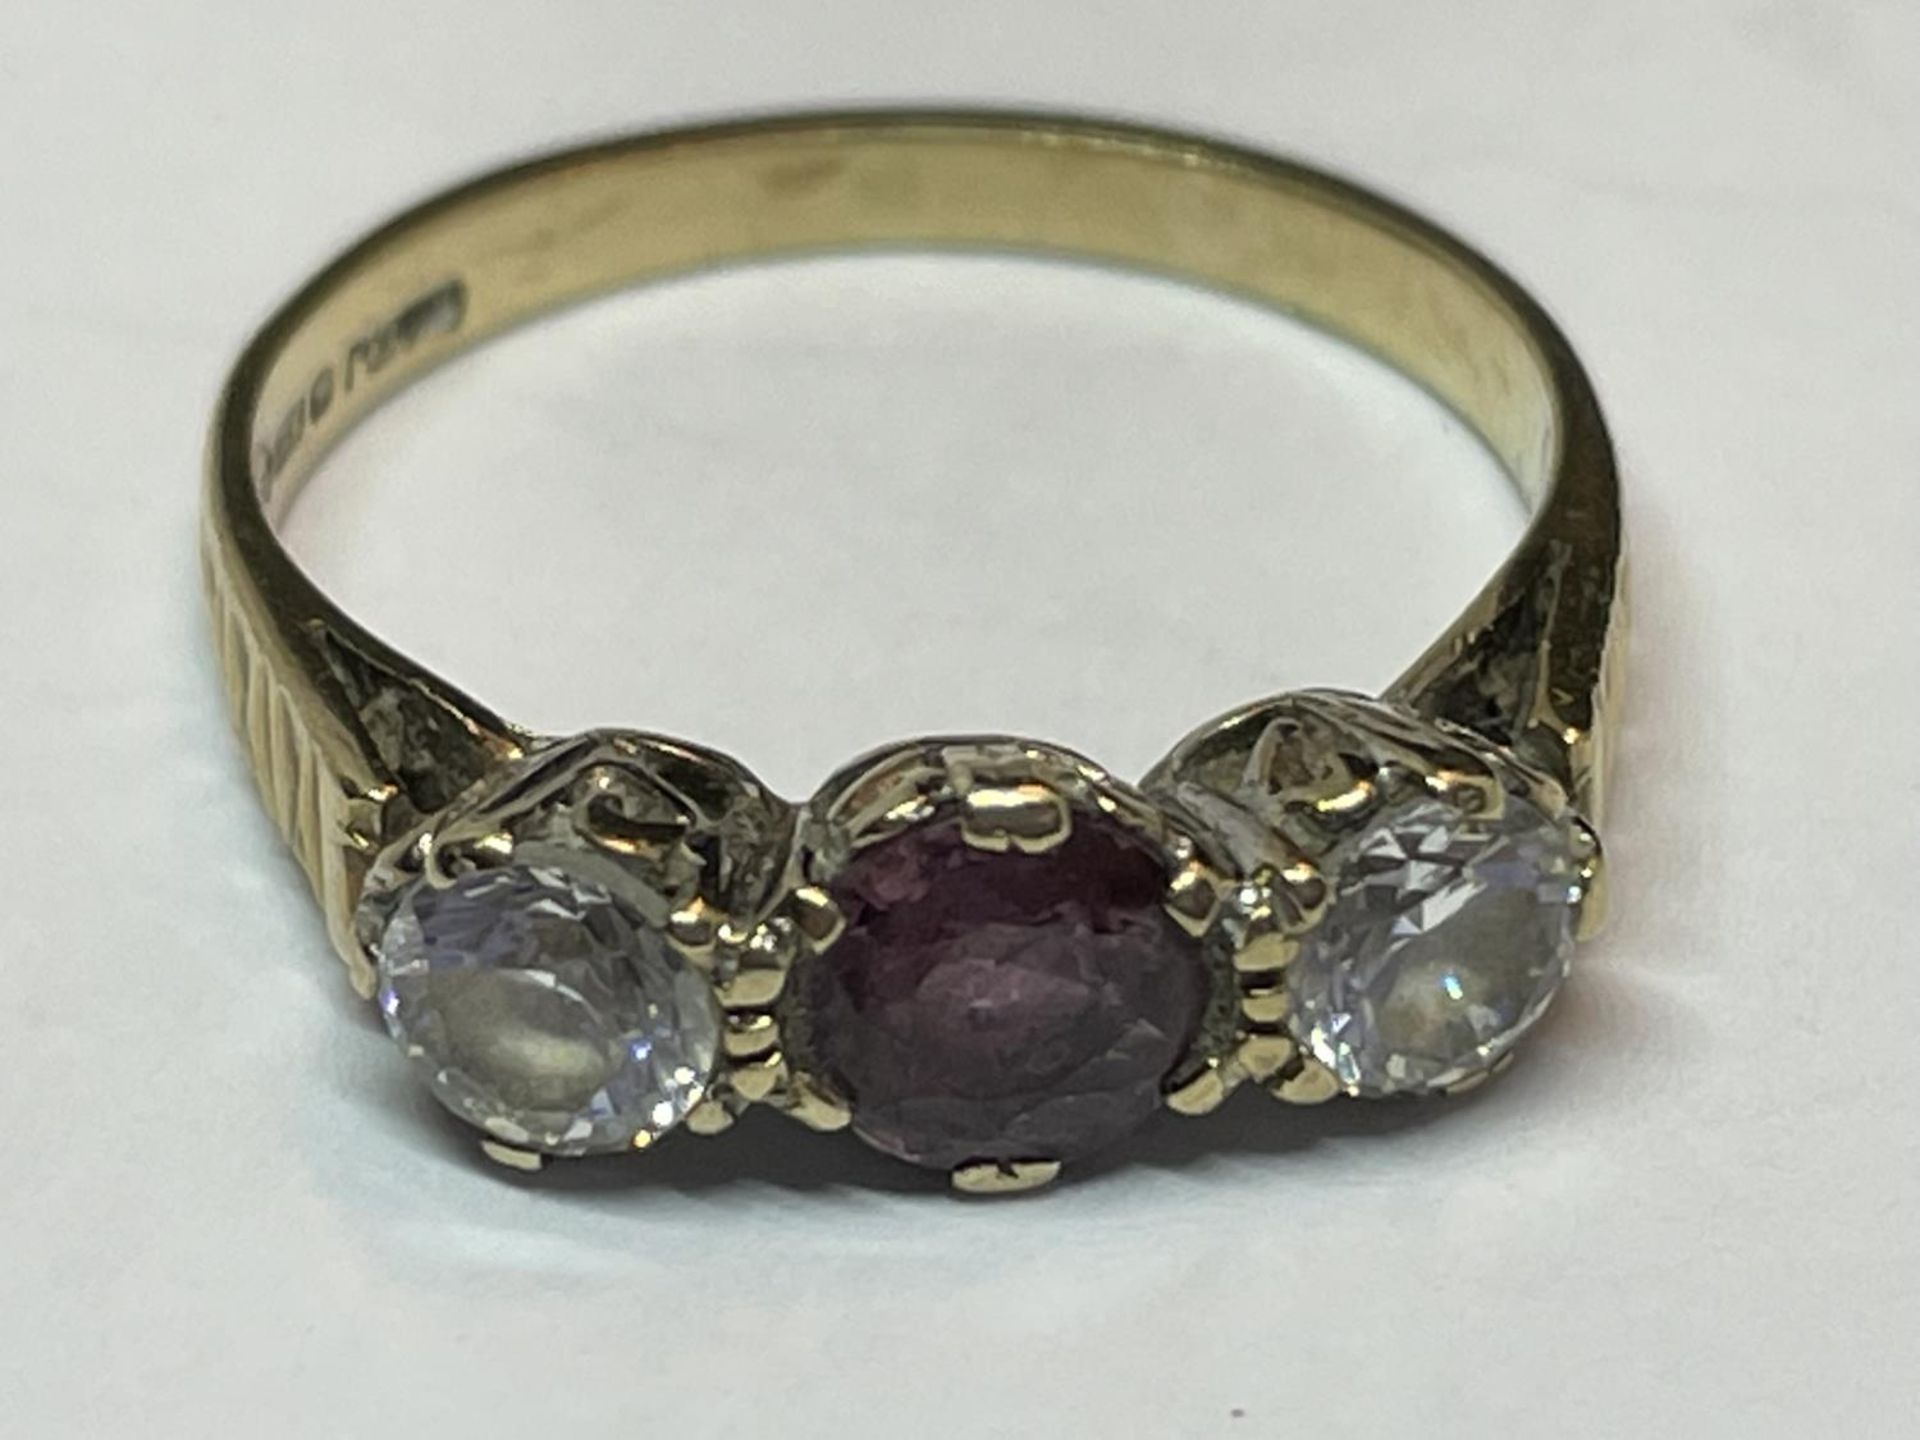 A 9 CARAT GOLD RING WITH AN AMETHYST AND TWO CLEAR STONES IN LINE SIZE K/L